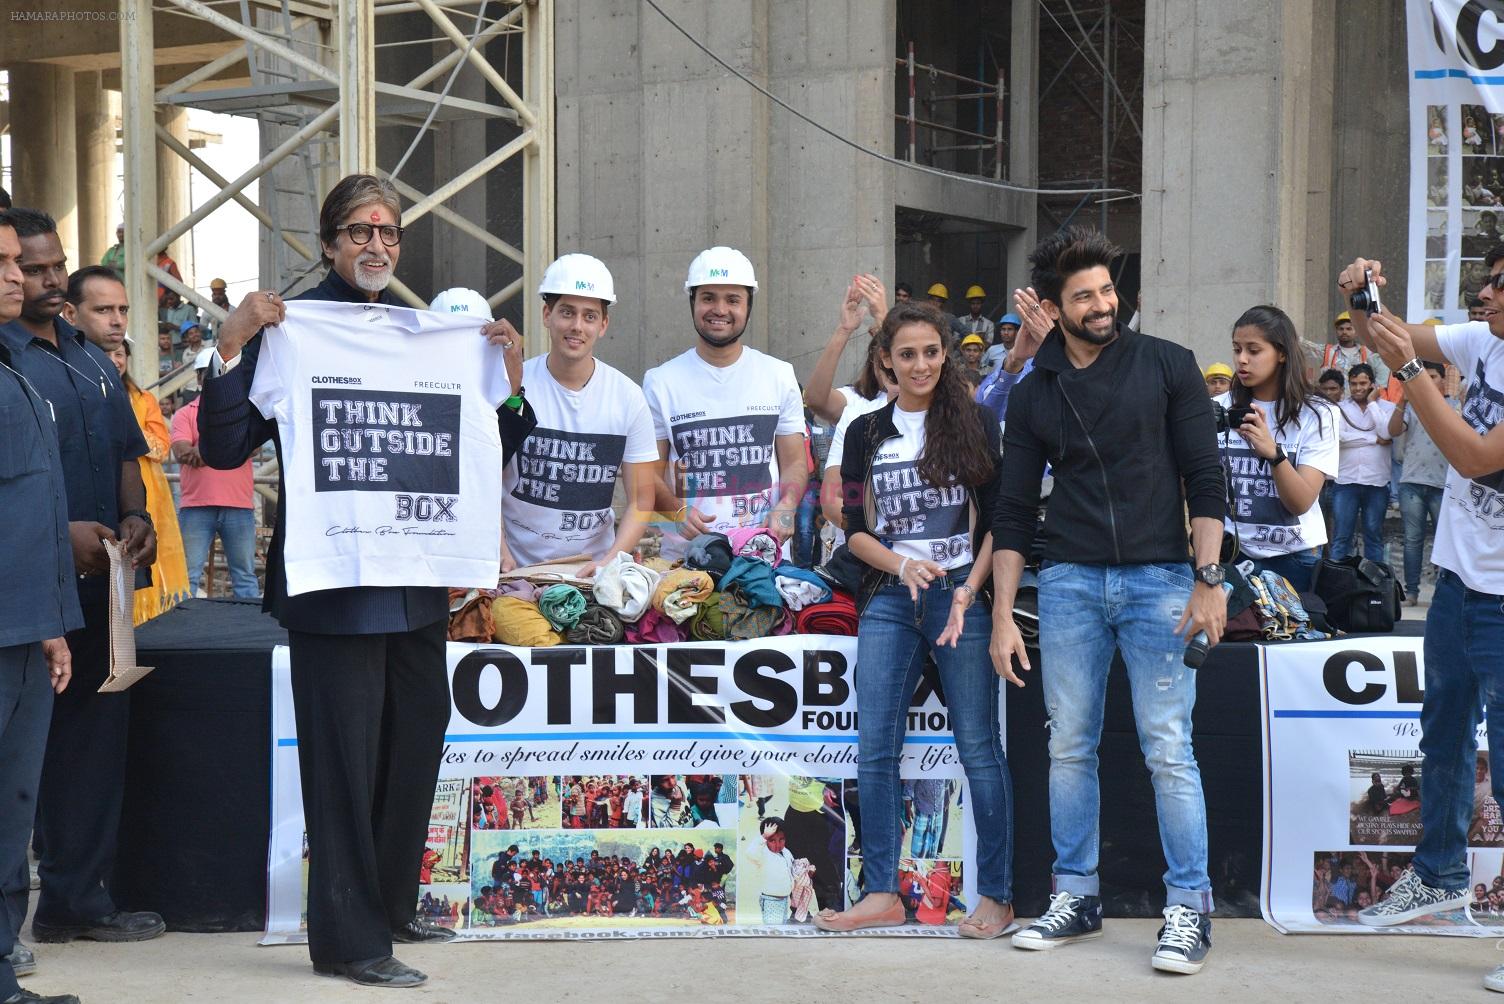 Amitabh Bachchan presented with Clothes Box Foundation Tshirt at Gurgaon construction site for Clothes Box Foundation donation